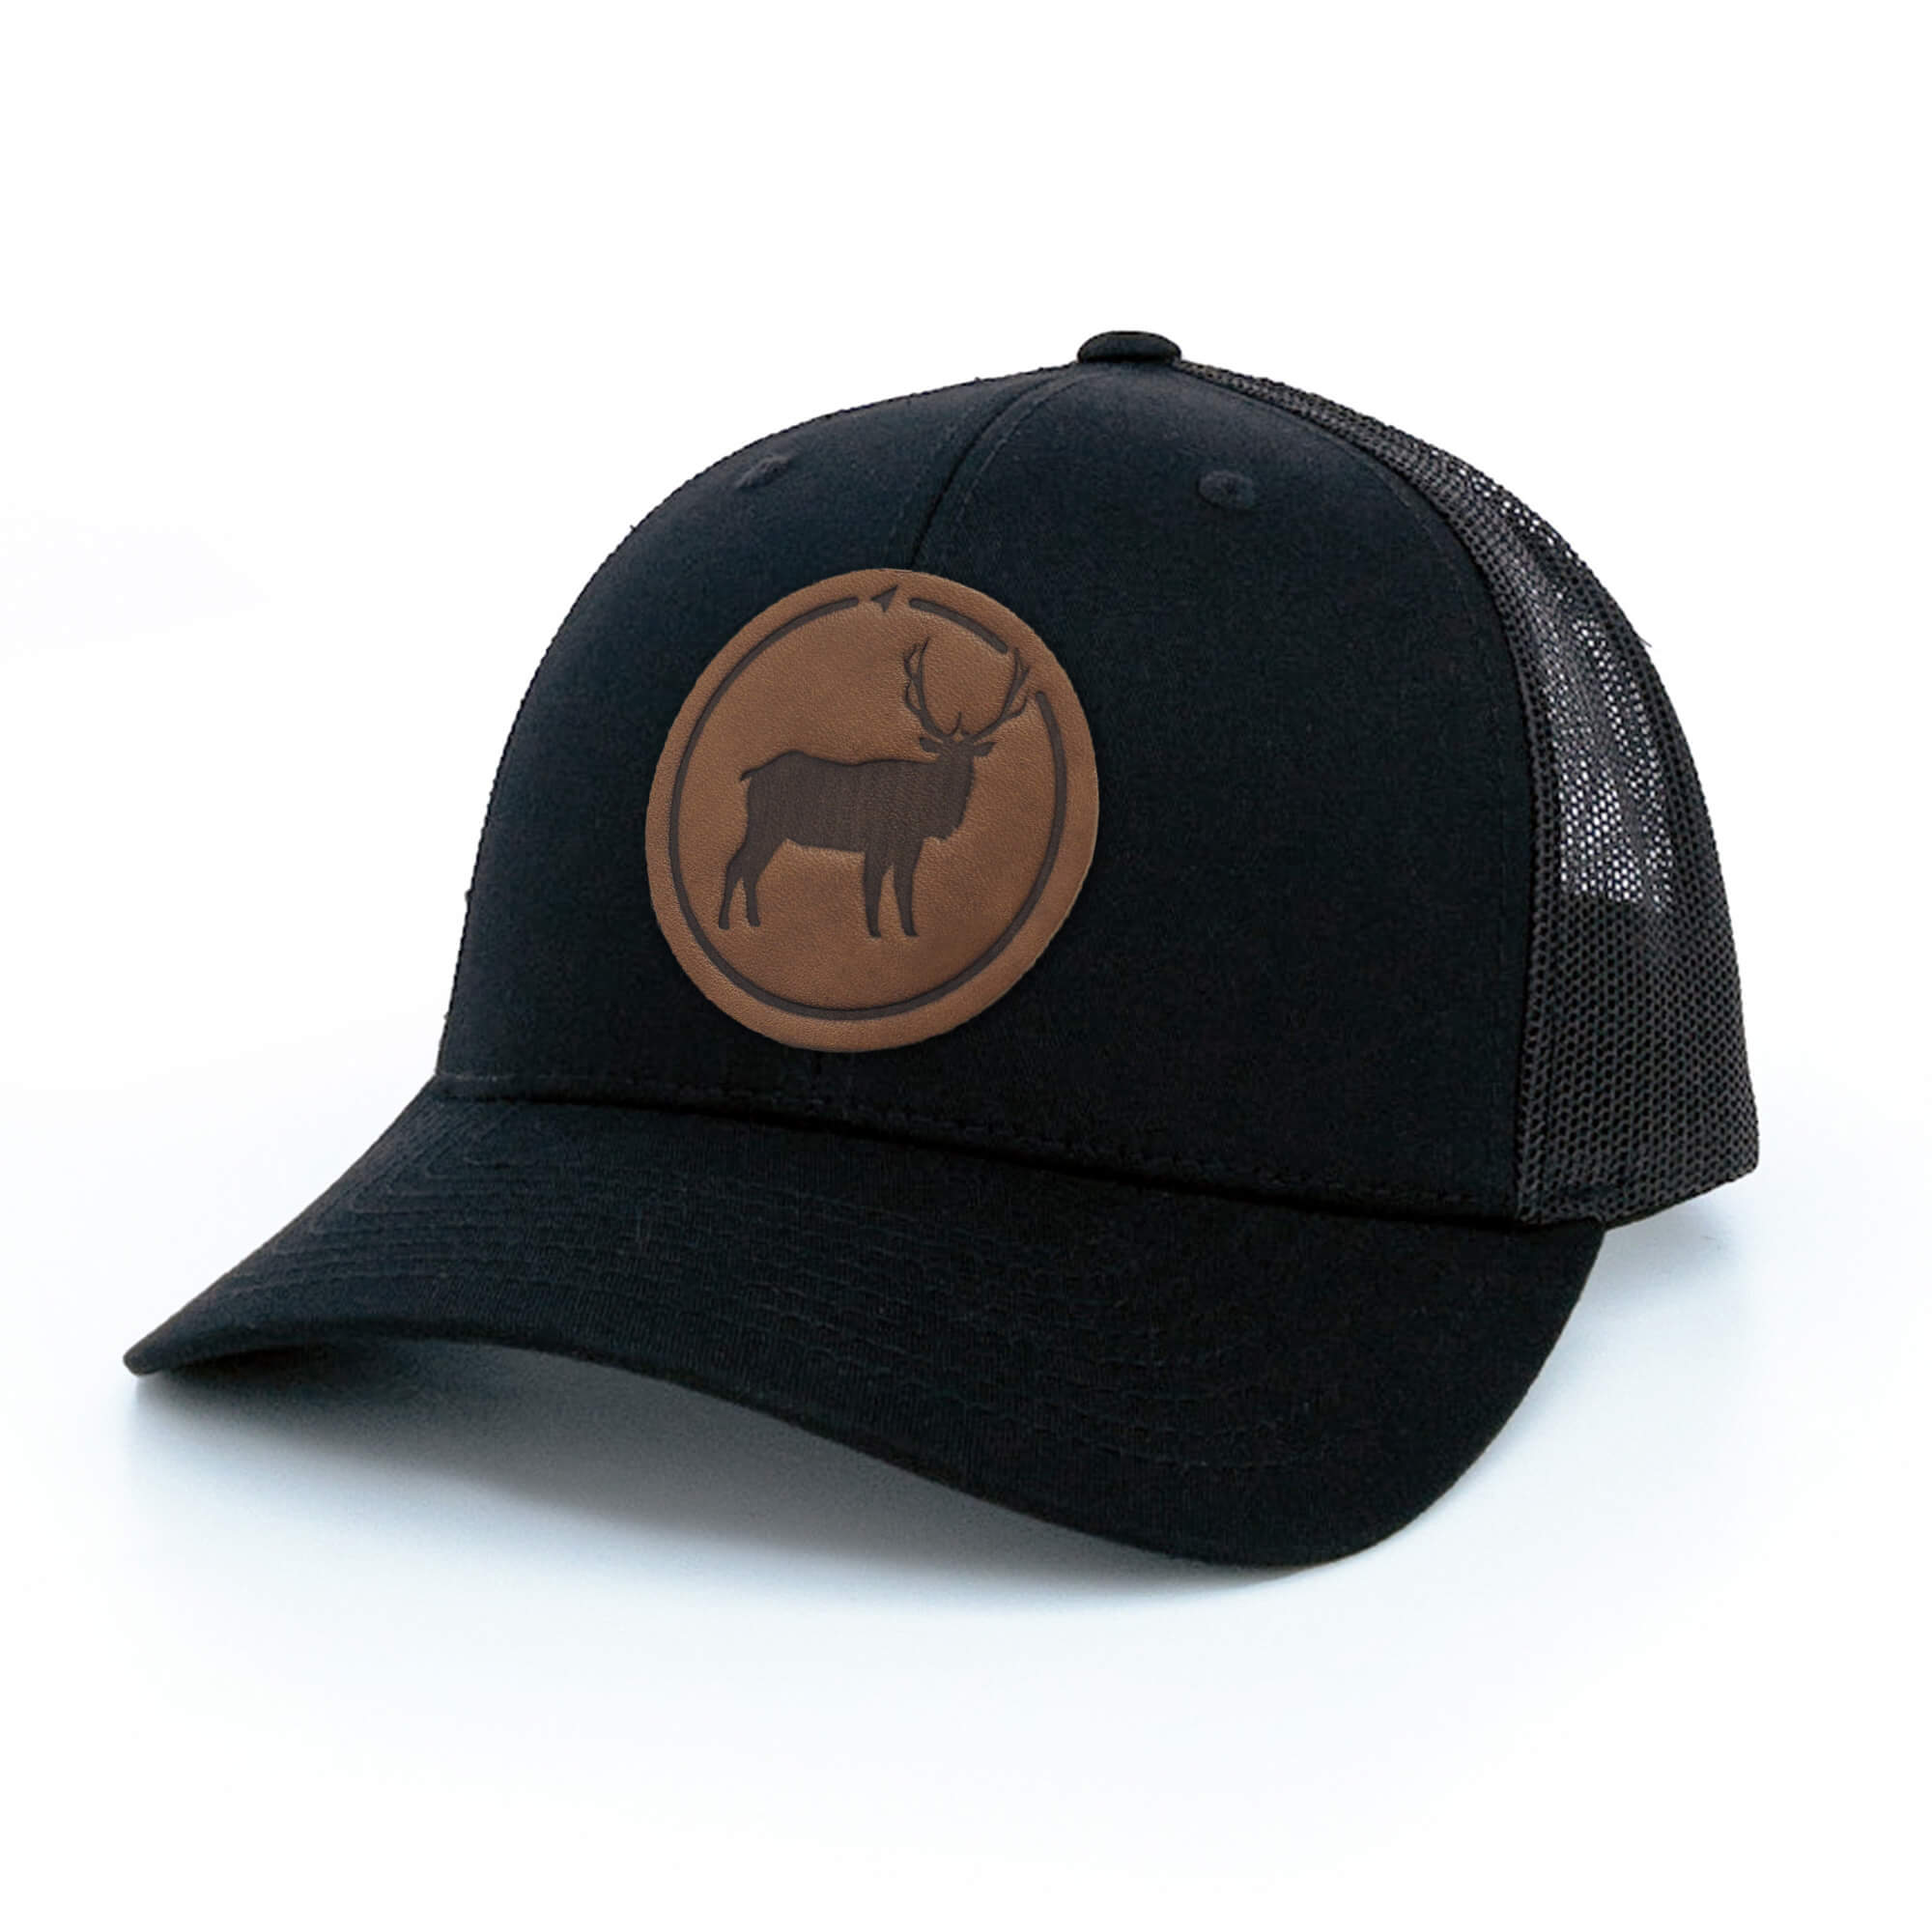 Black trucker hat with full-grain leather patch of Elk | BLACK-004-006, CHARC-004-006, NAVY-004-006, HGREY-004-006, MOSS-004-006, BROWN-004-006